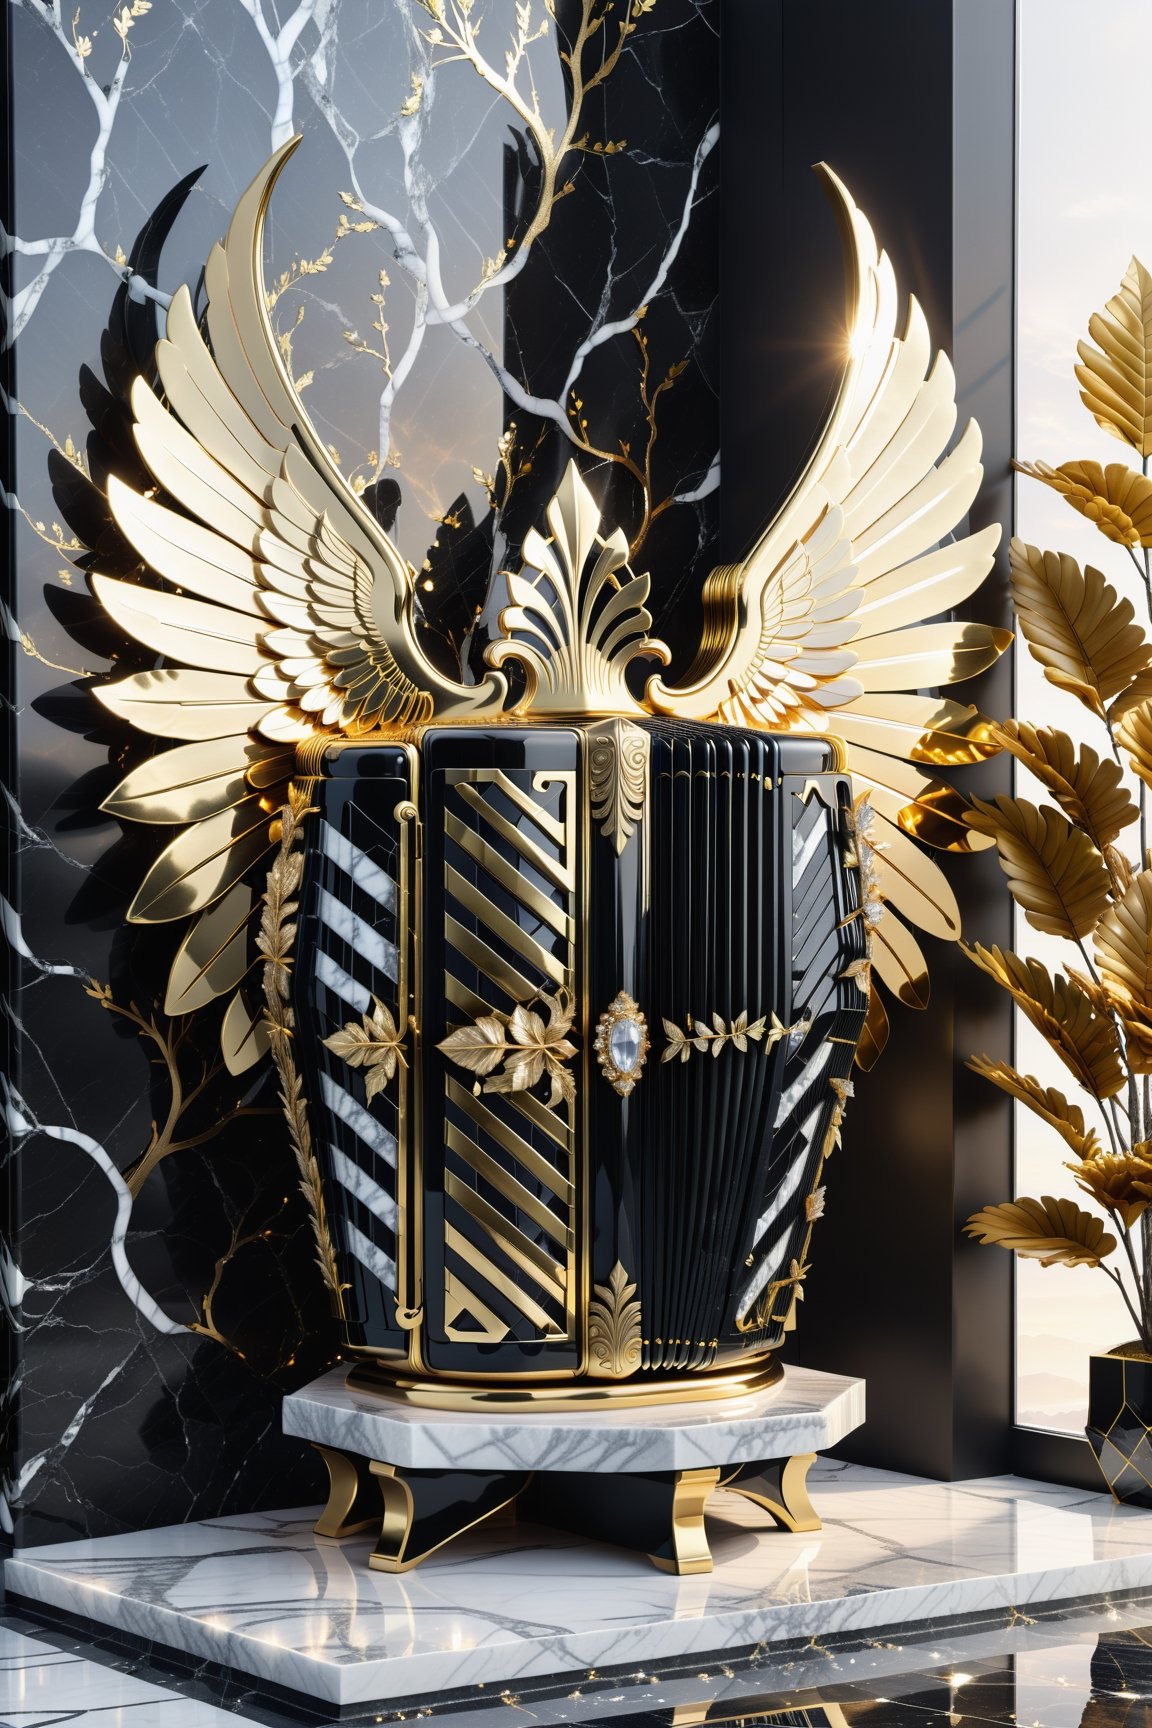 High definition photorealistic render of an incredible and mysterious beautiful and luxurious Accordion with intricate gold and white marble details and wings adorning the design, placed on a luxurious column-style throne in black and white marble with crystal and glass with iridescent details and parametric style, located in a daytime landscape with an ice floor, with leaves autumn, many flowers and dry trees, with a strong sun in the background with fire and smoke